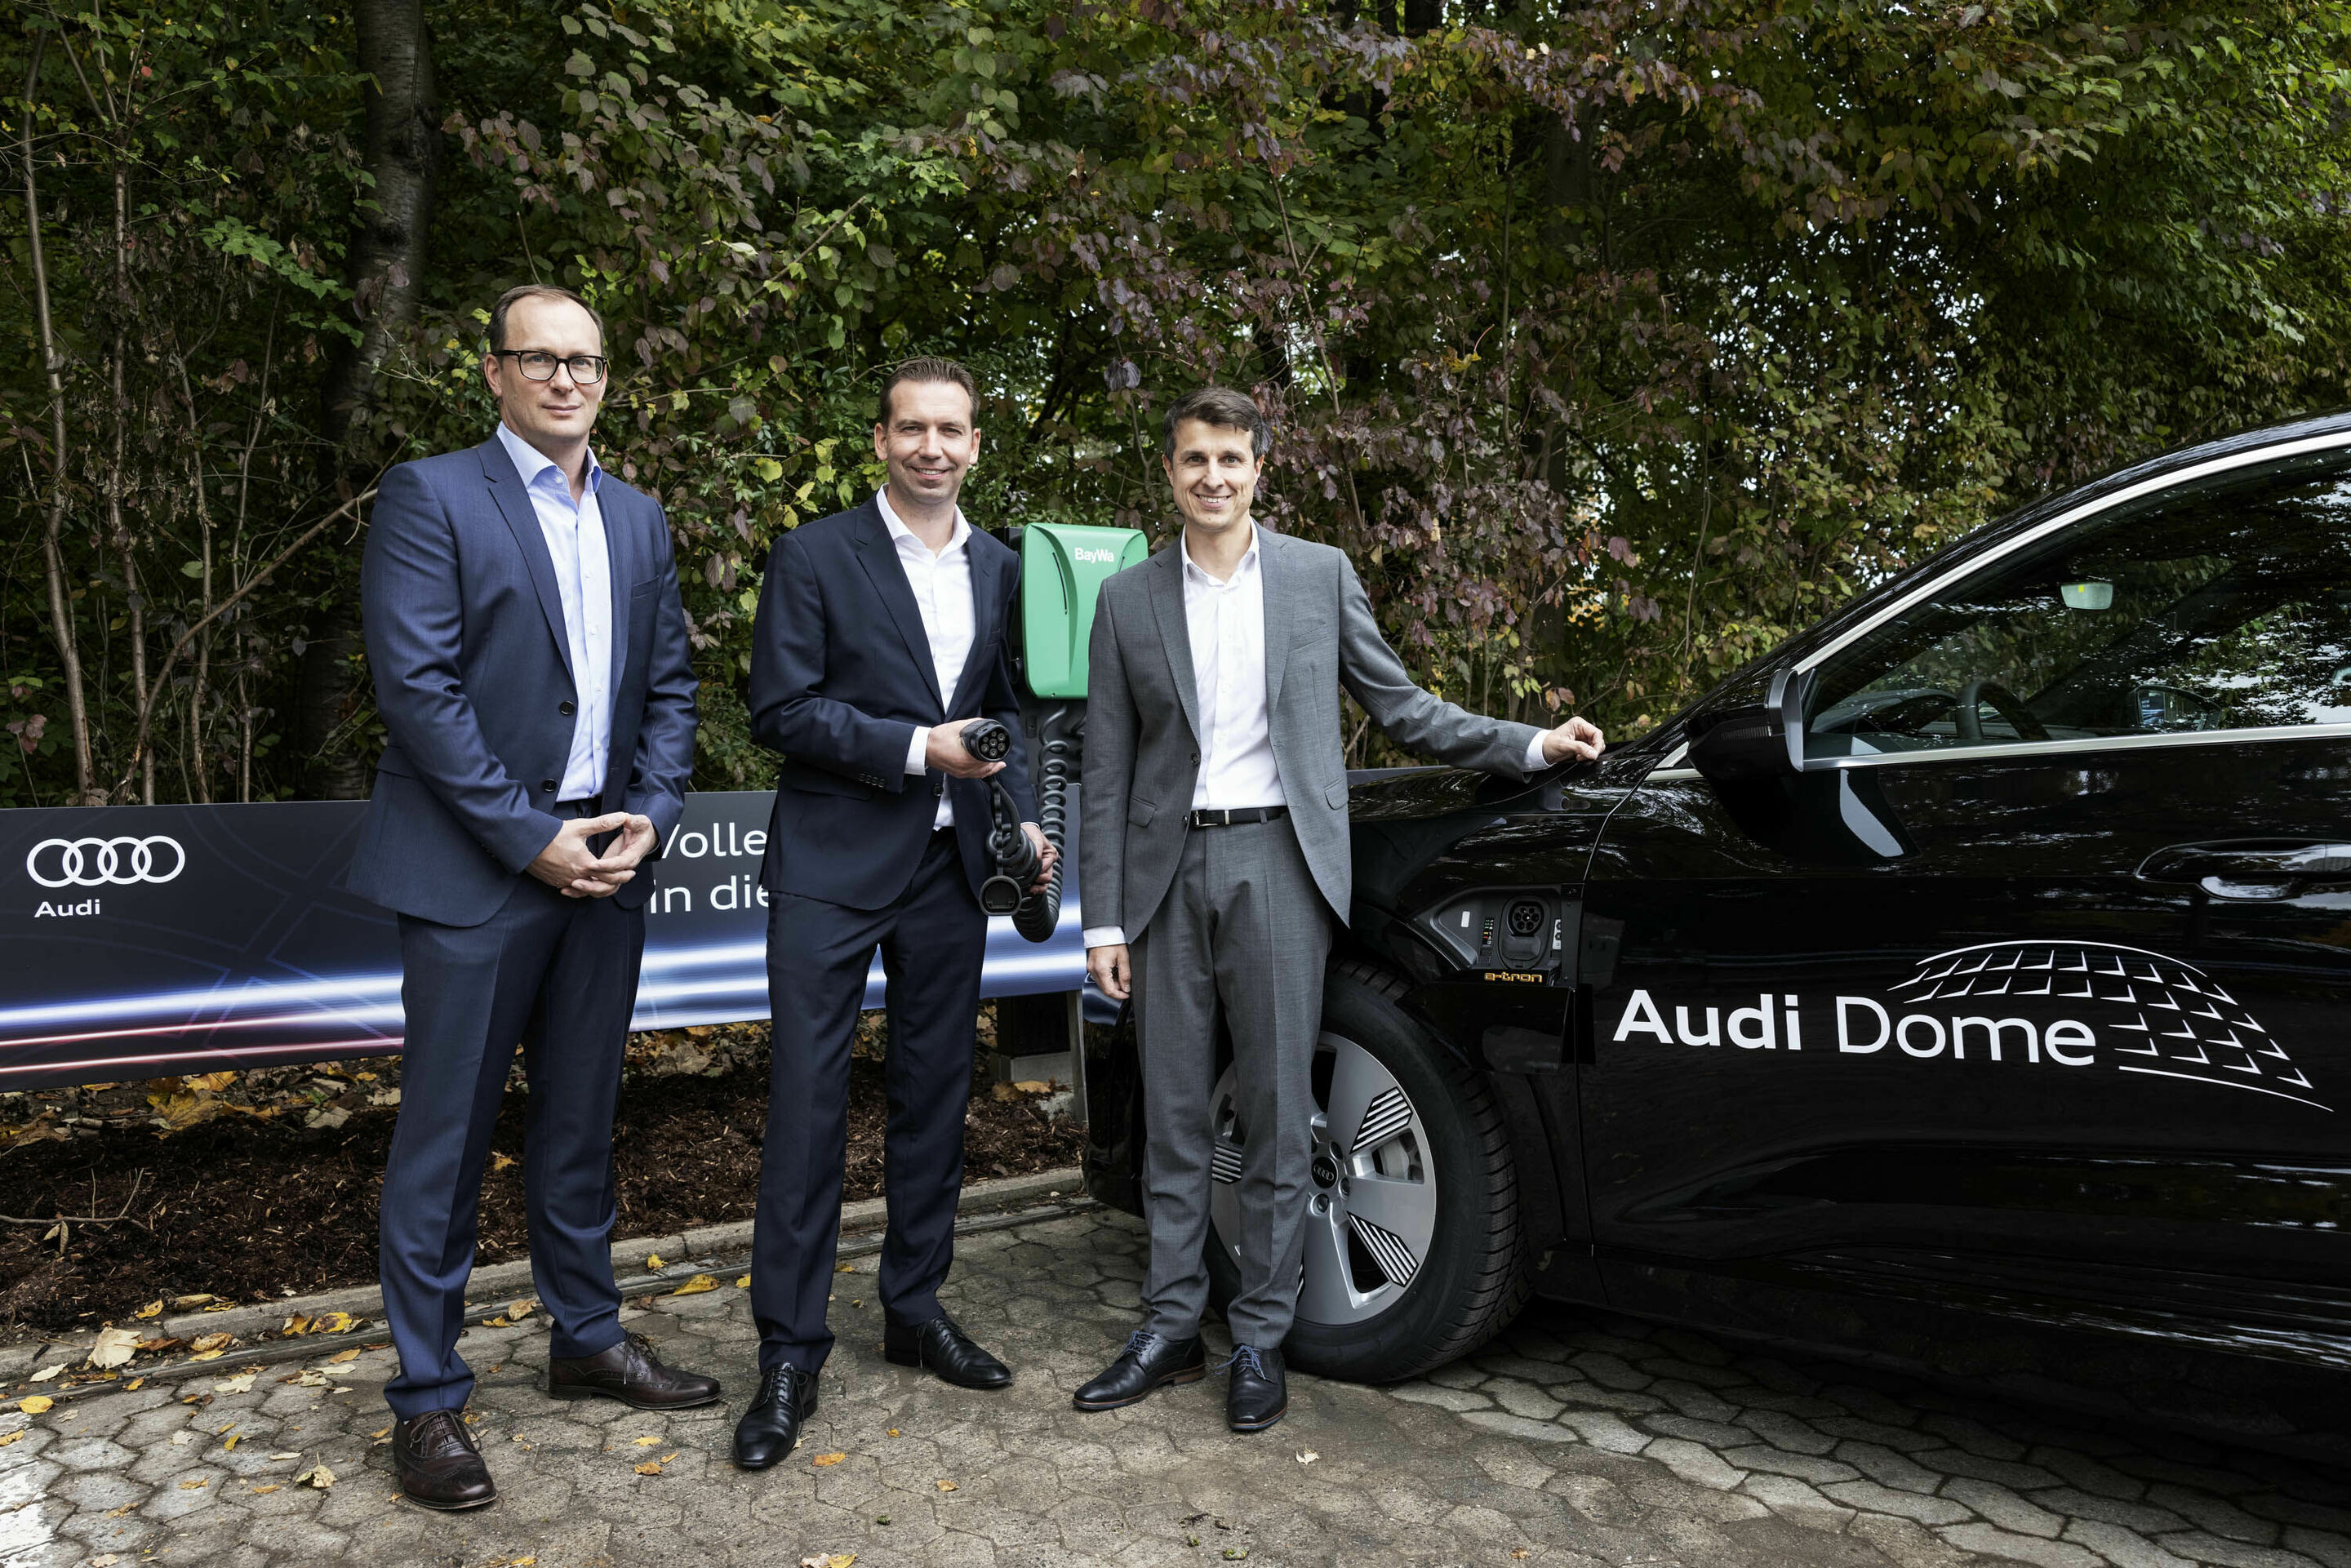 Audi is electrifying the basketball professionals from FC Bayern